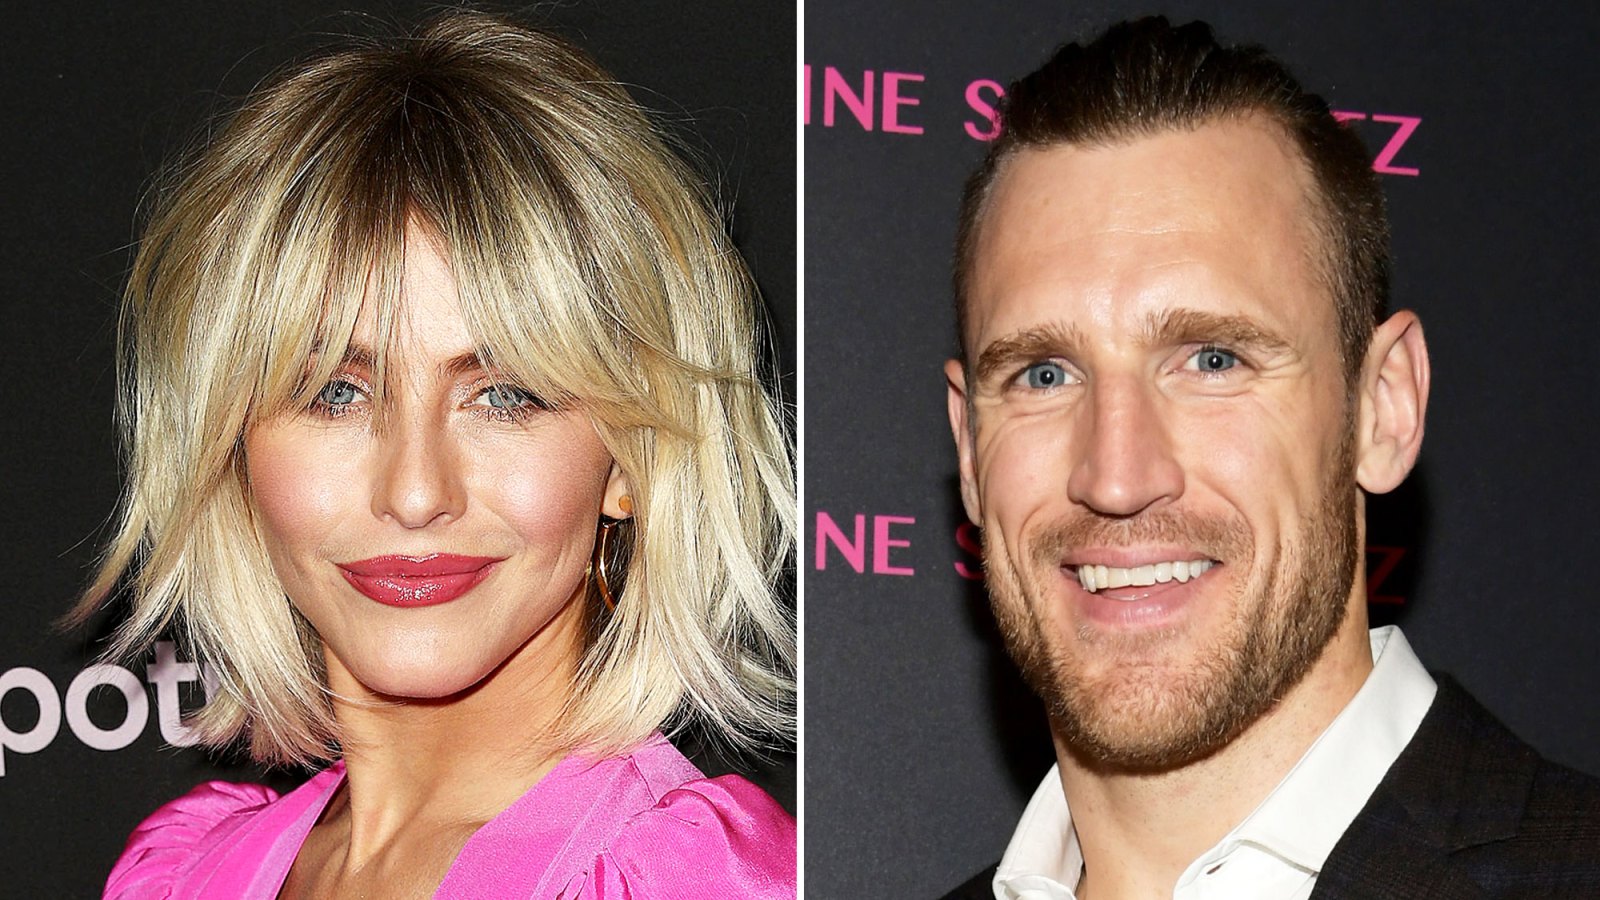 Julianne Hough Believes ‘the Ugly Parts’ Are the ‘Best Parts’ in Her Marriage to Brooks Laich